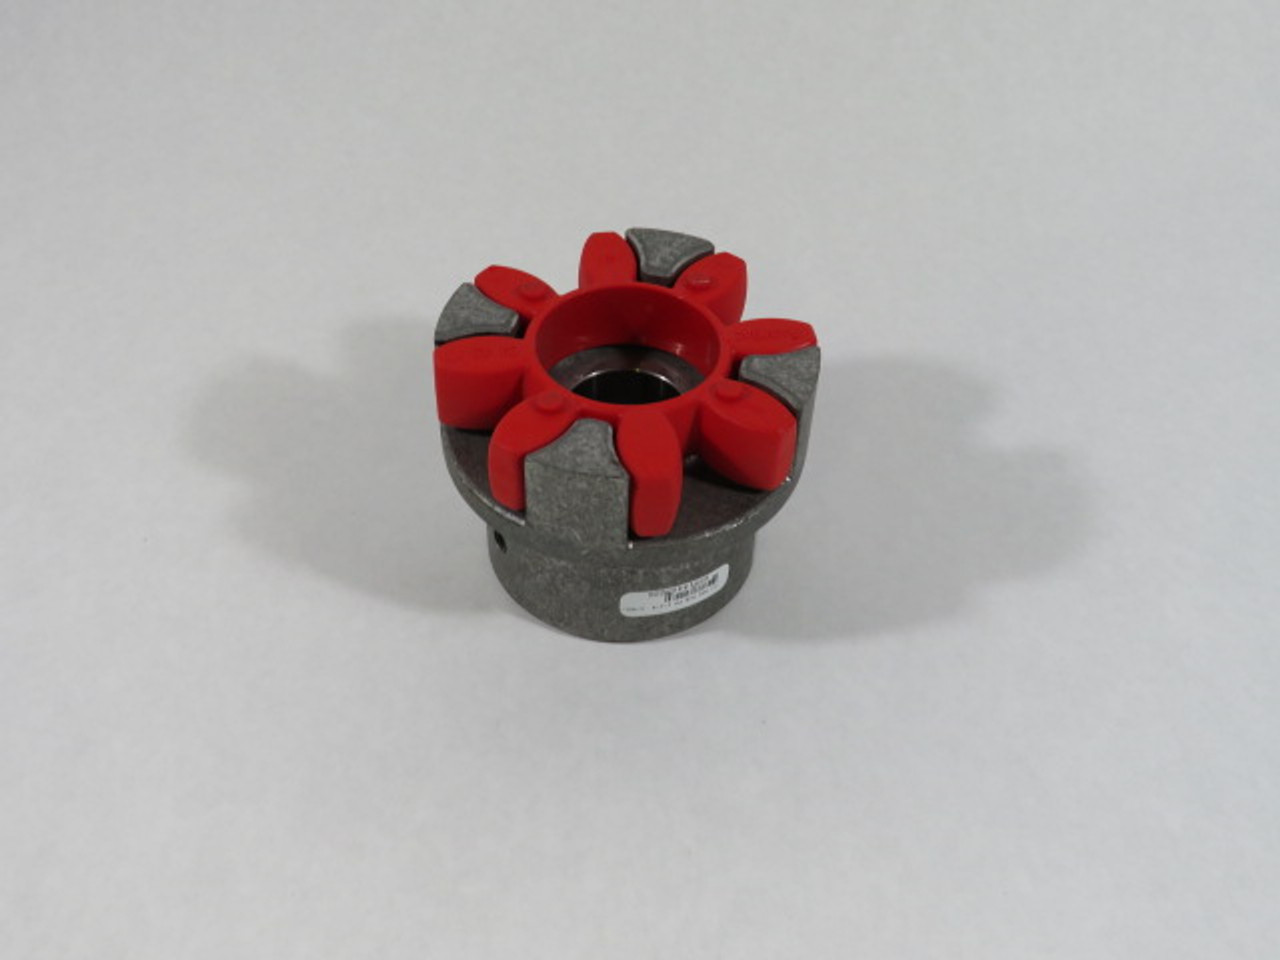 Lovejoy CJ 42A Jaw Coupling 1-1/4" ID 3.74" OD C/W Red Spider Coupling USED